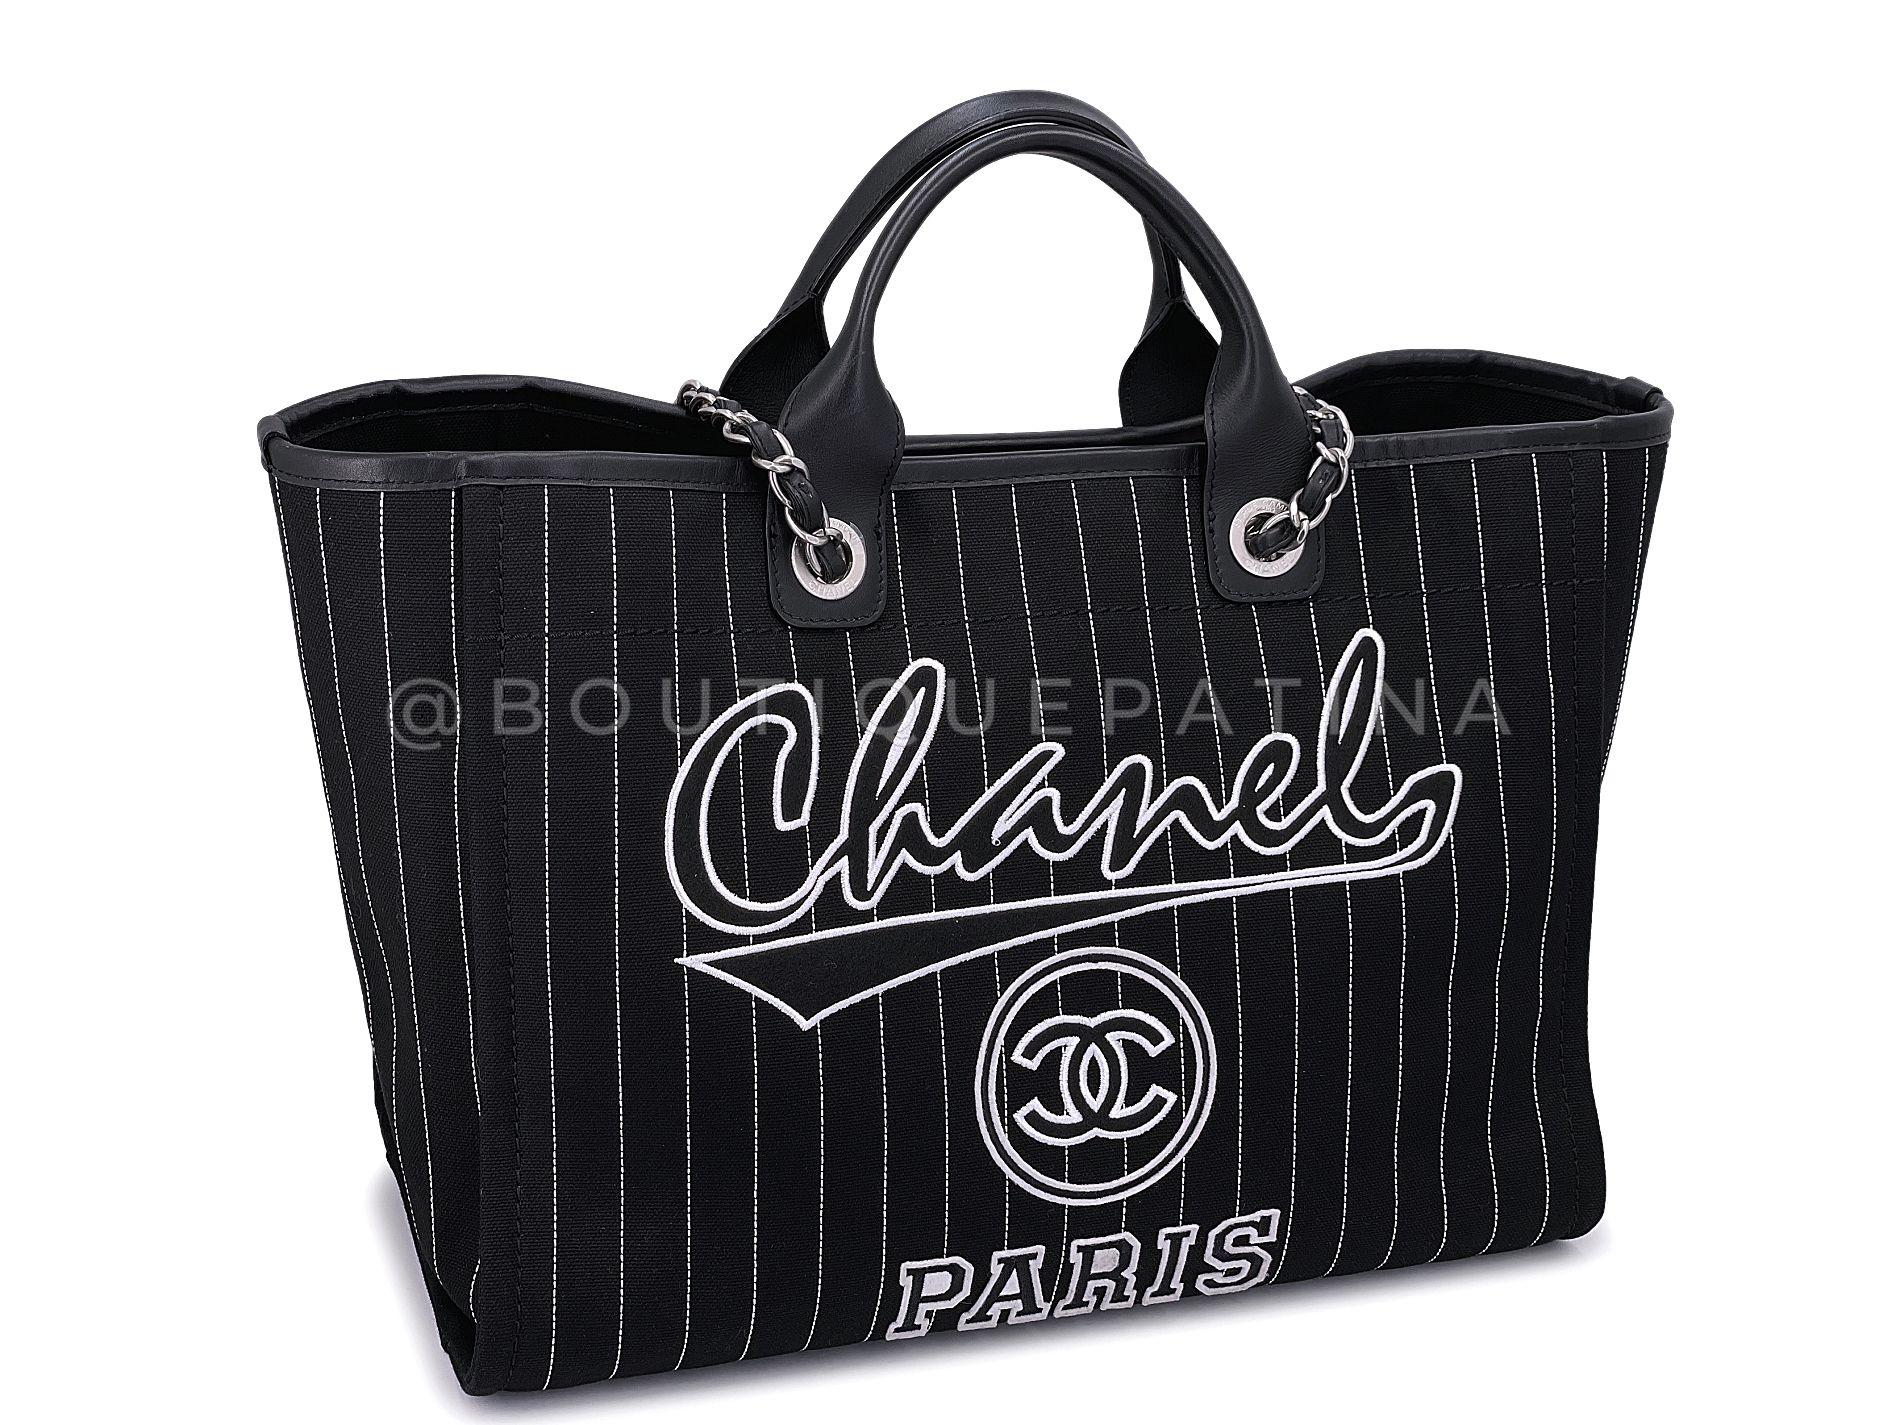 Rare Chanel Baseball Jersey Large Deauville Tote Bag 67968 In Excellent Condition For Sale In Costa Mesa, CA